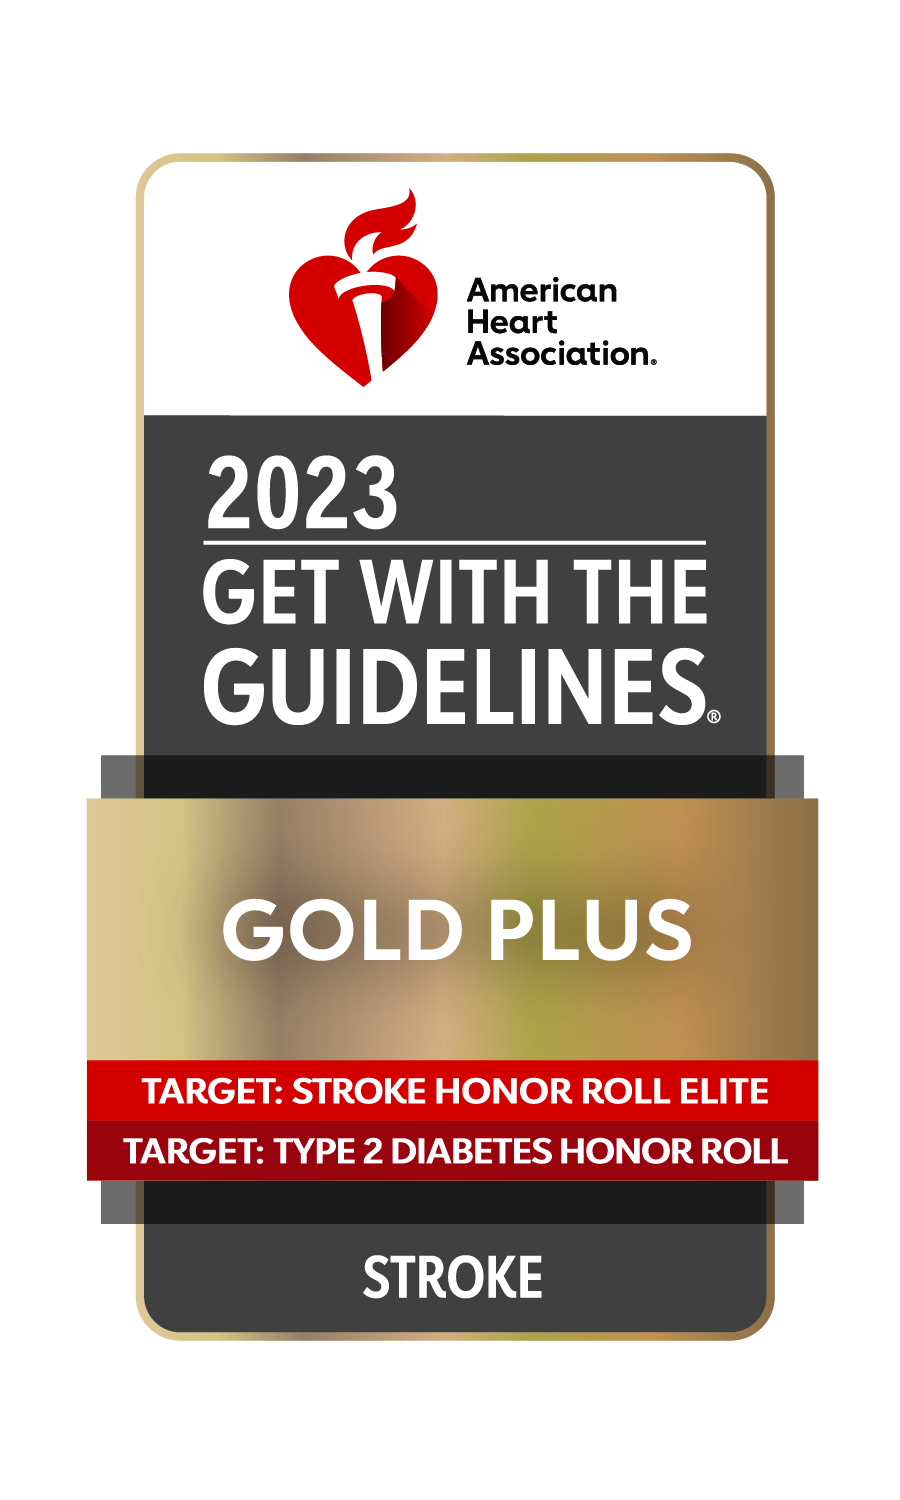 American Heart Association 2023 Get with the Guidelines Stroke Gold Plus Award badge.